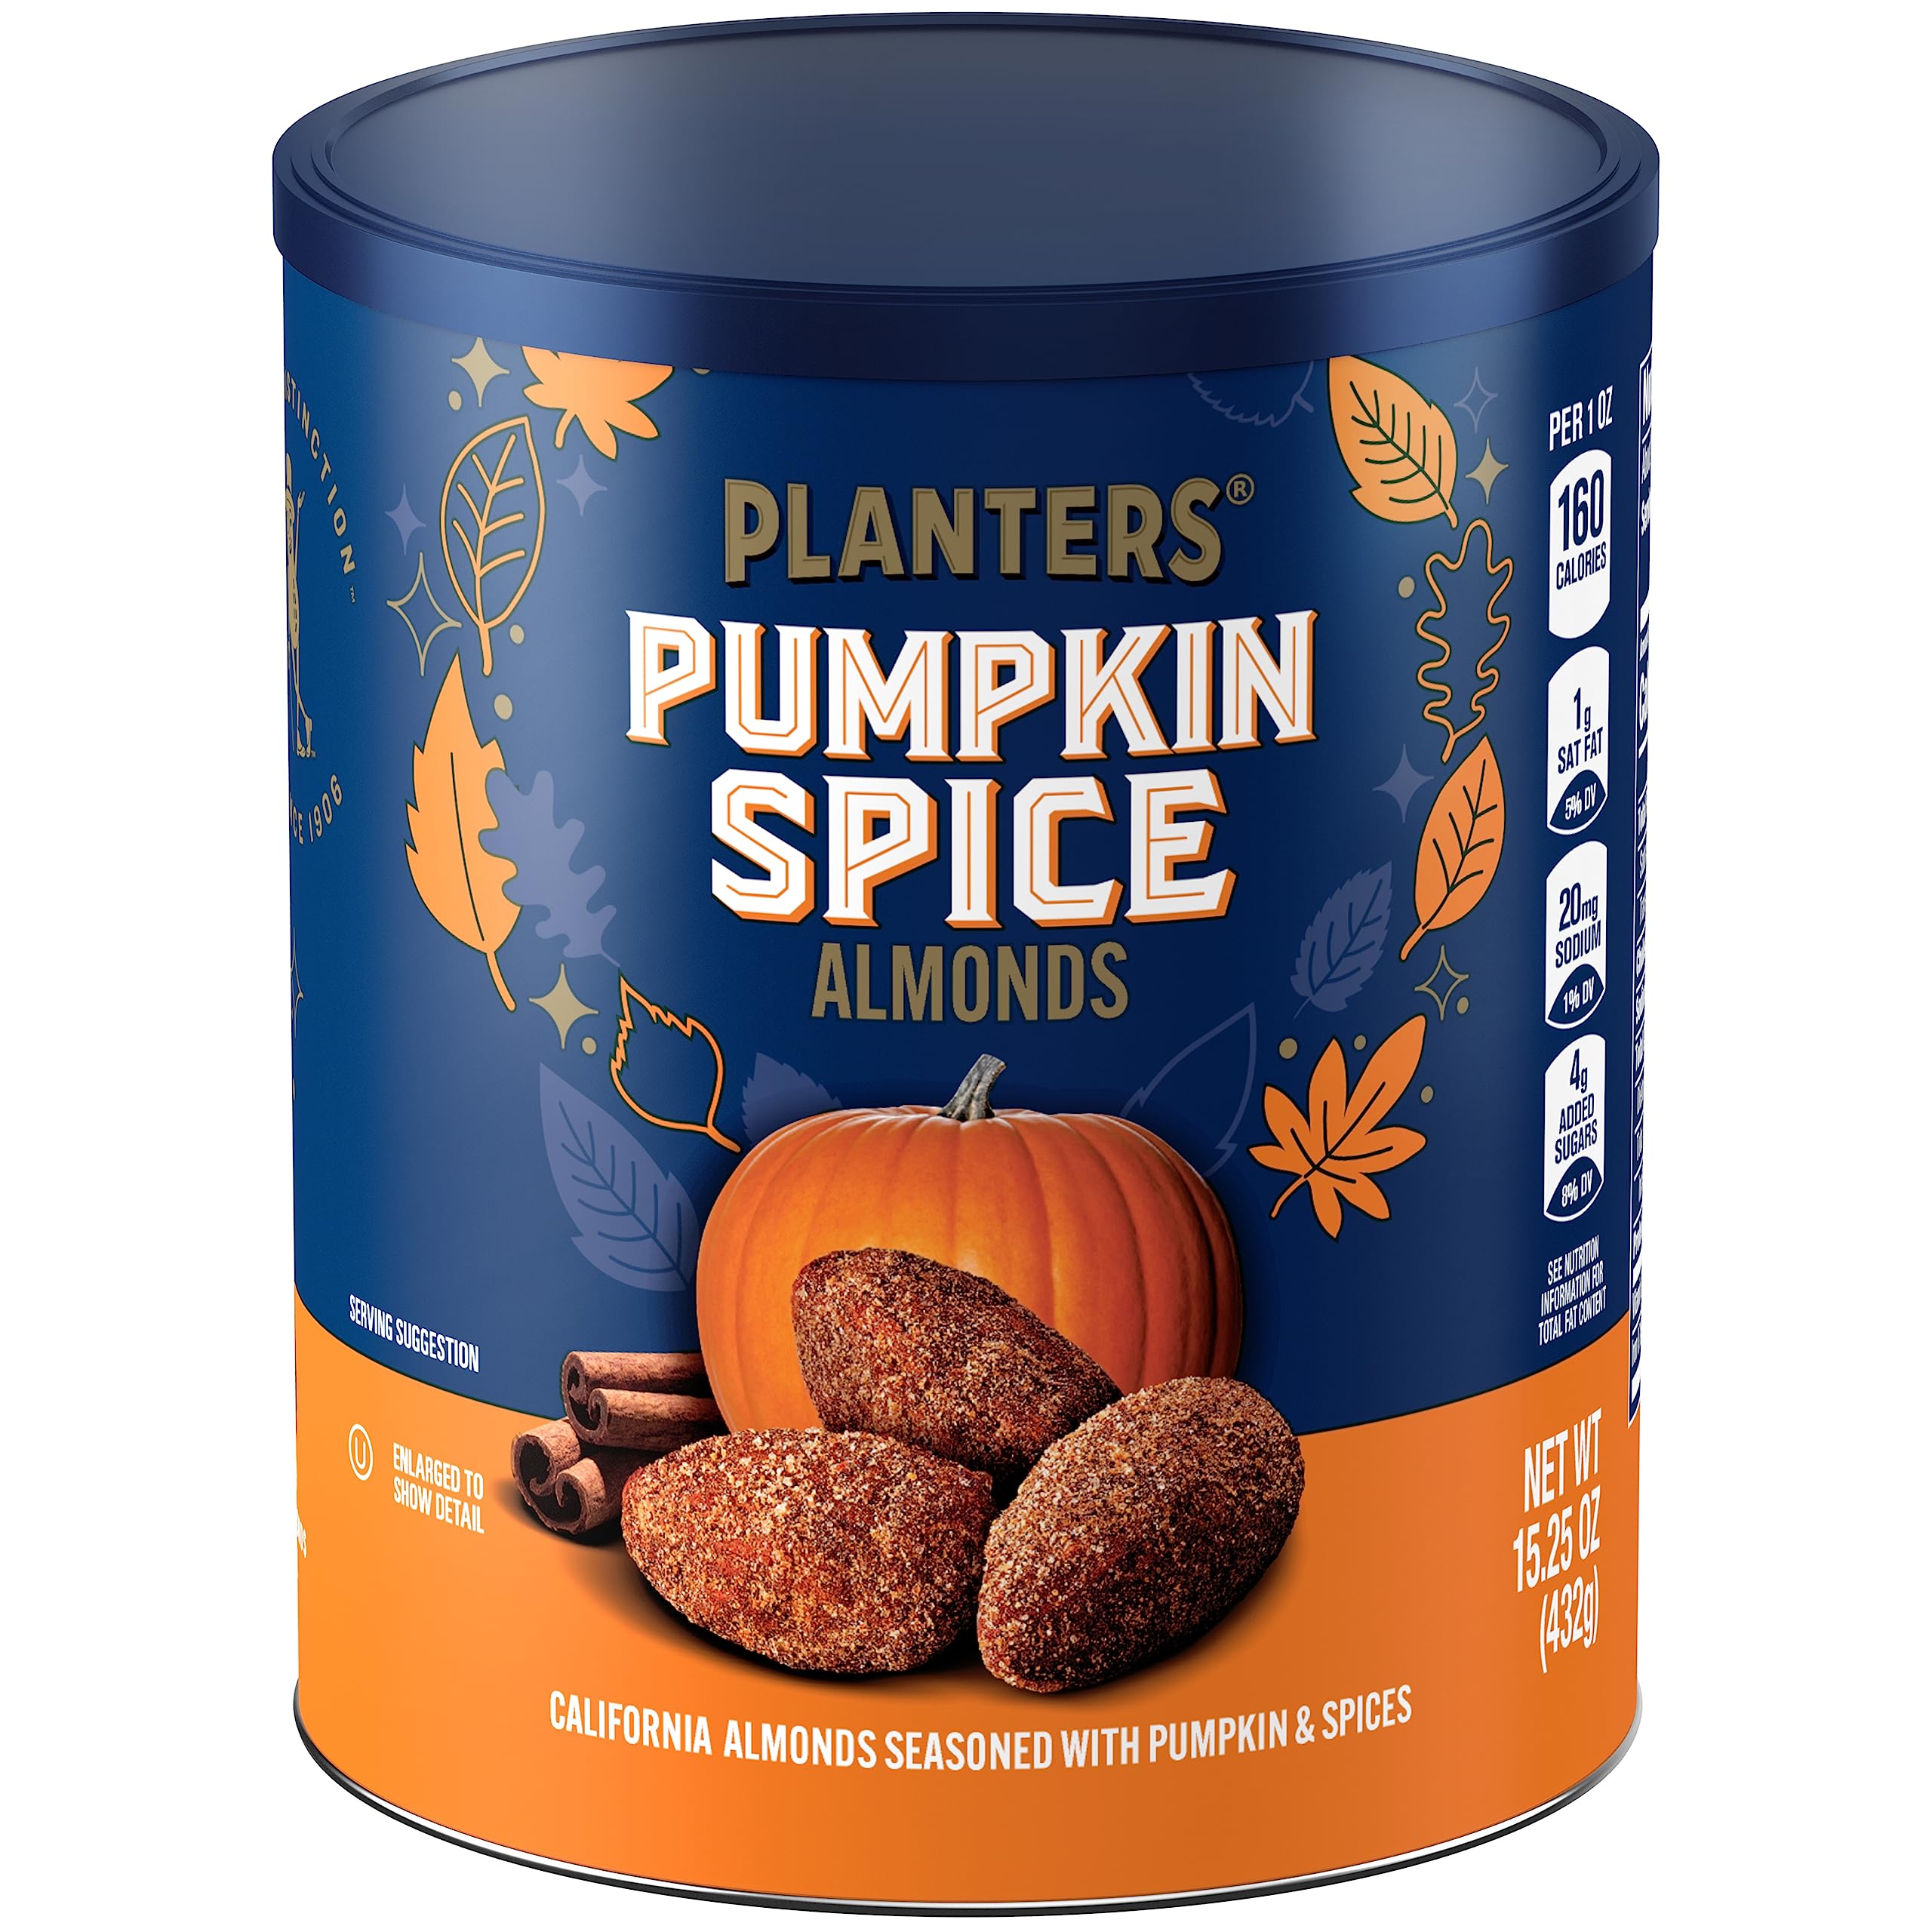 15.25-Oz Planters Pumpkin Spice Almonds $5.88 + Free Shipping w/ Prime or on orders over $35